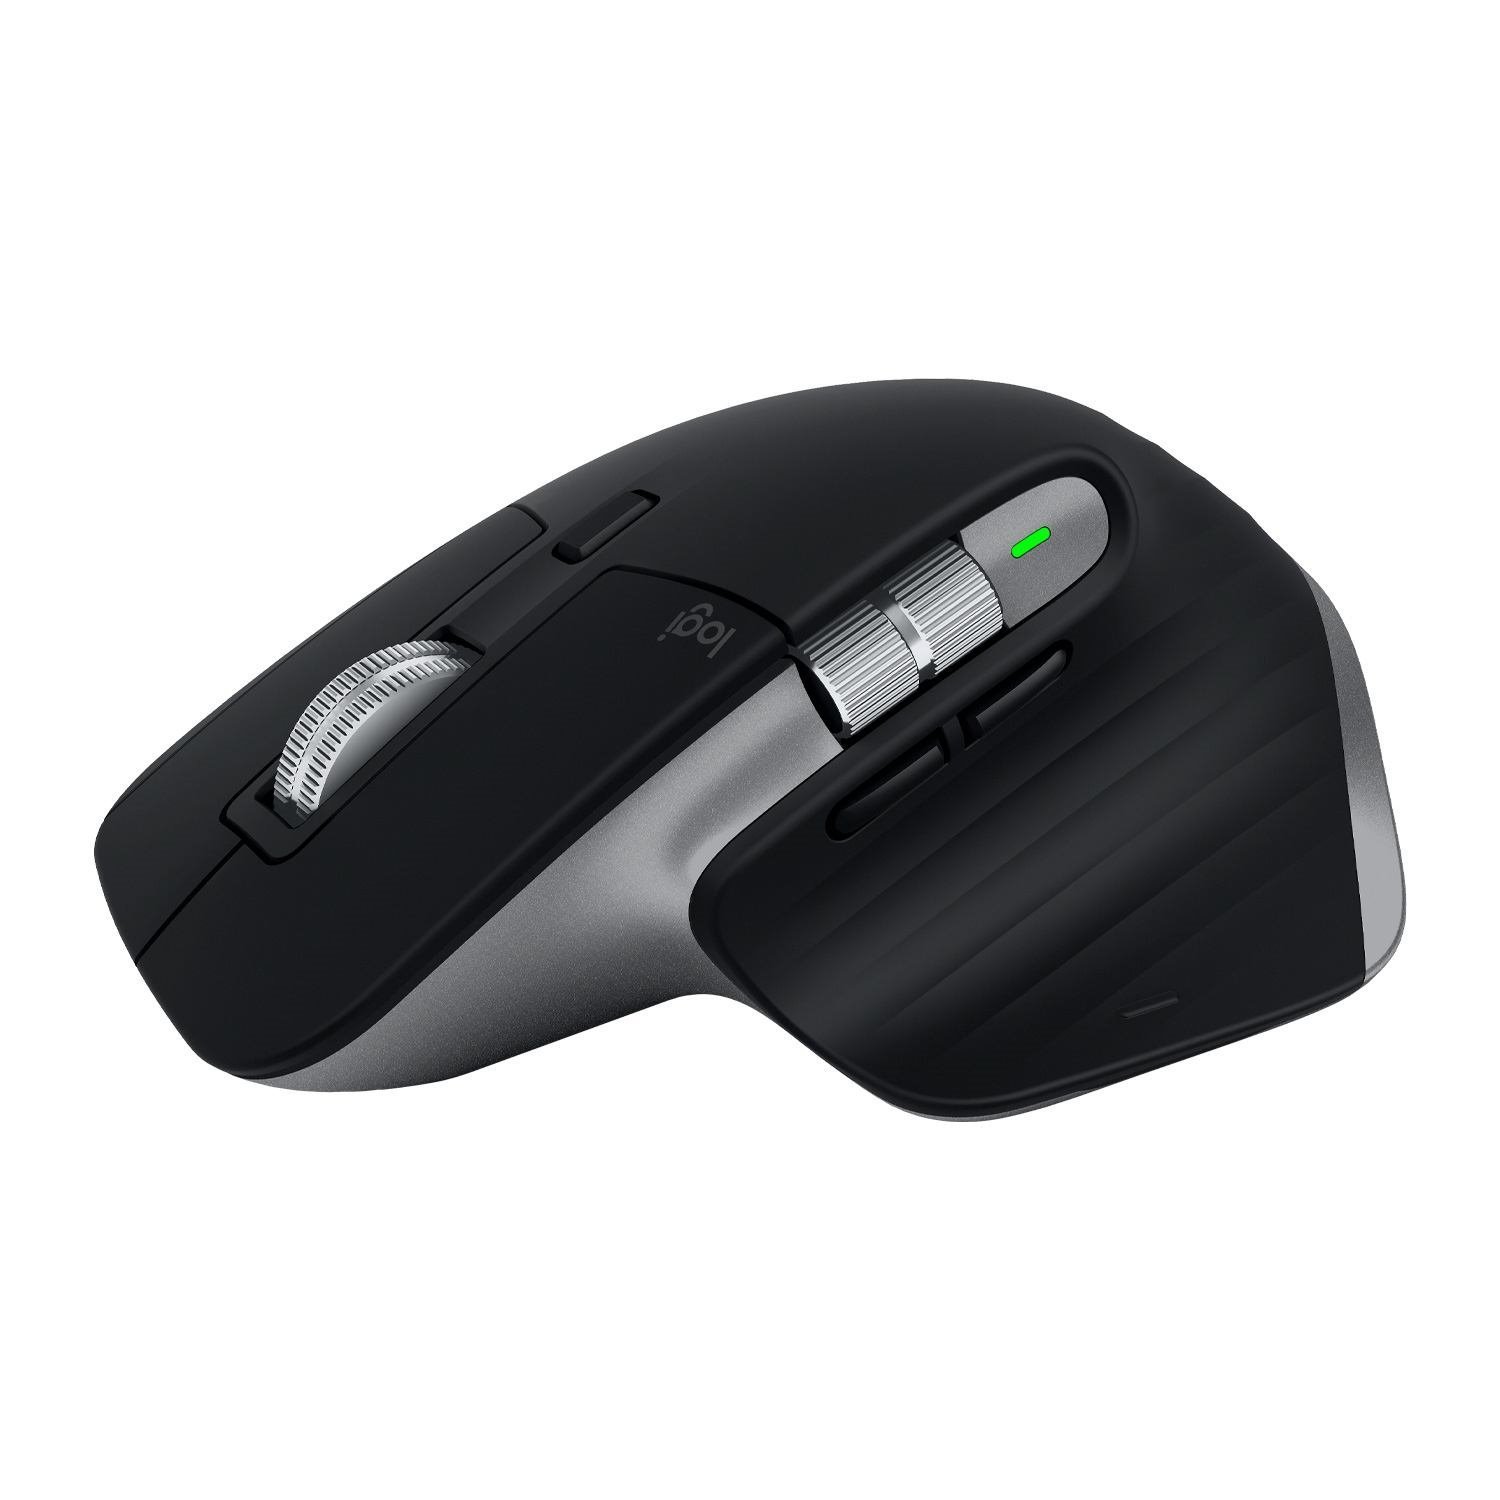 Logitech MX Master 3 Mouse - Bluetooth/Radio Frequency - USB - Darkfield - 7 Button(s)